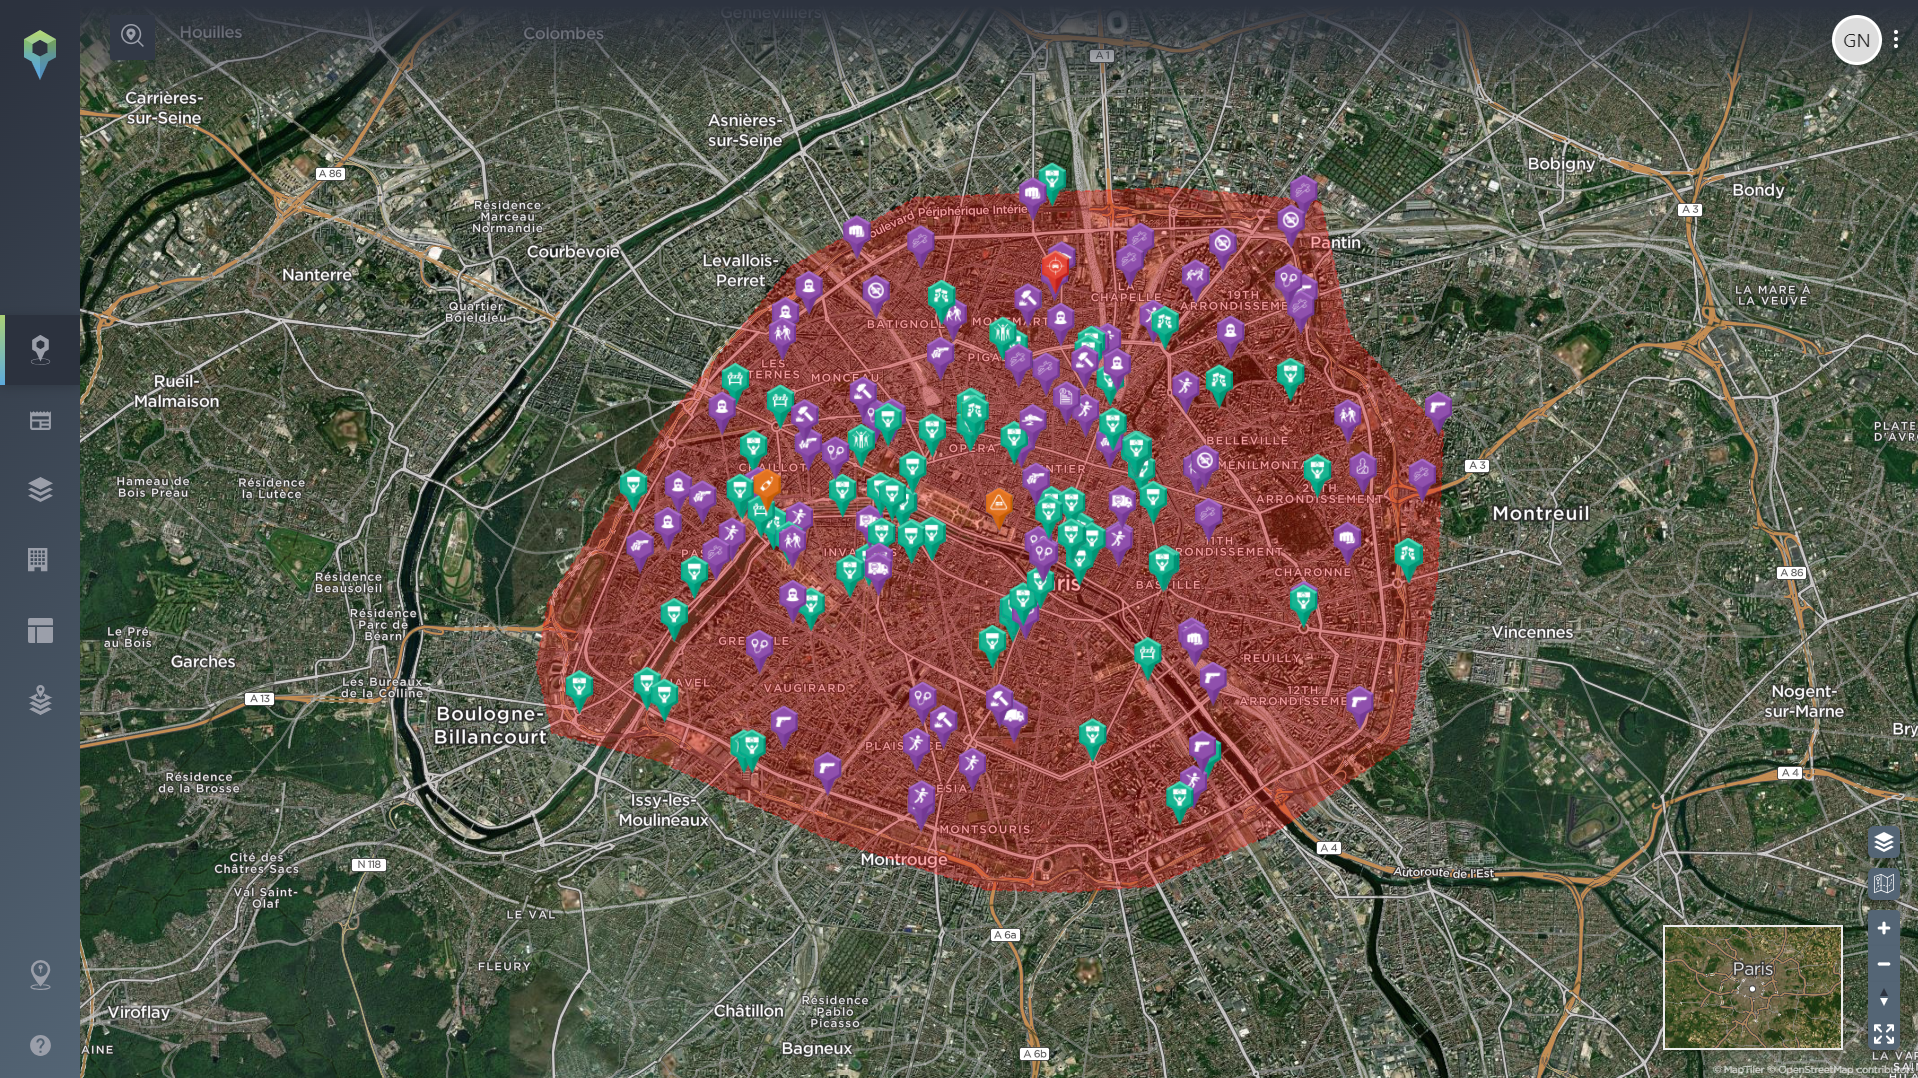 geofencing security risk assessment paris past 6 months crime and protests